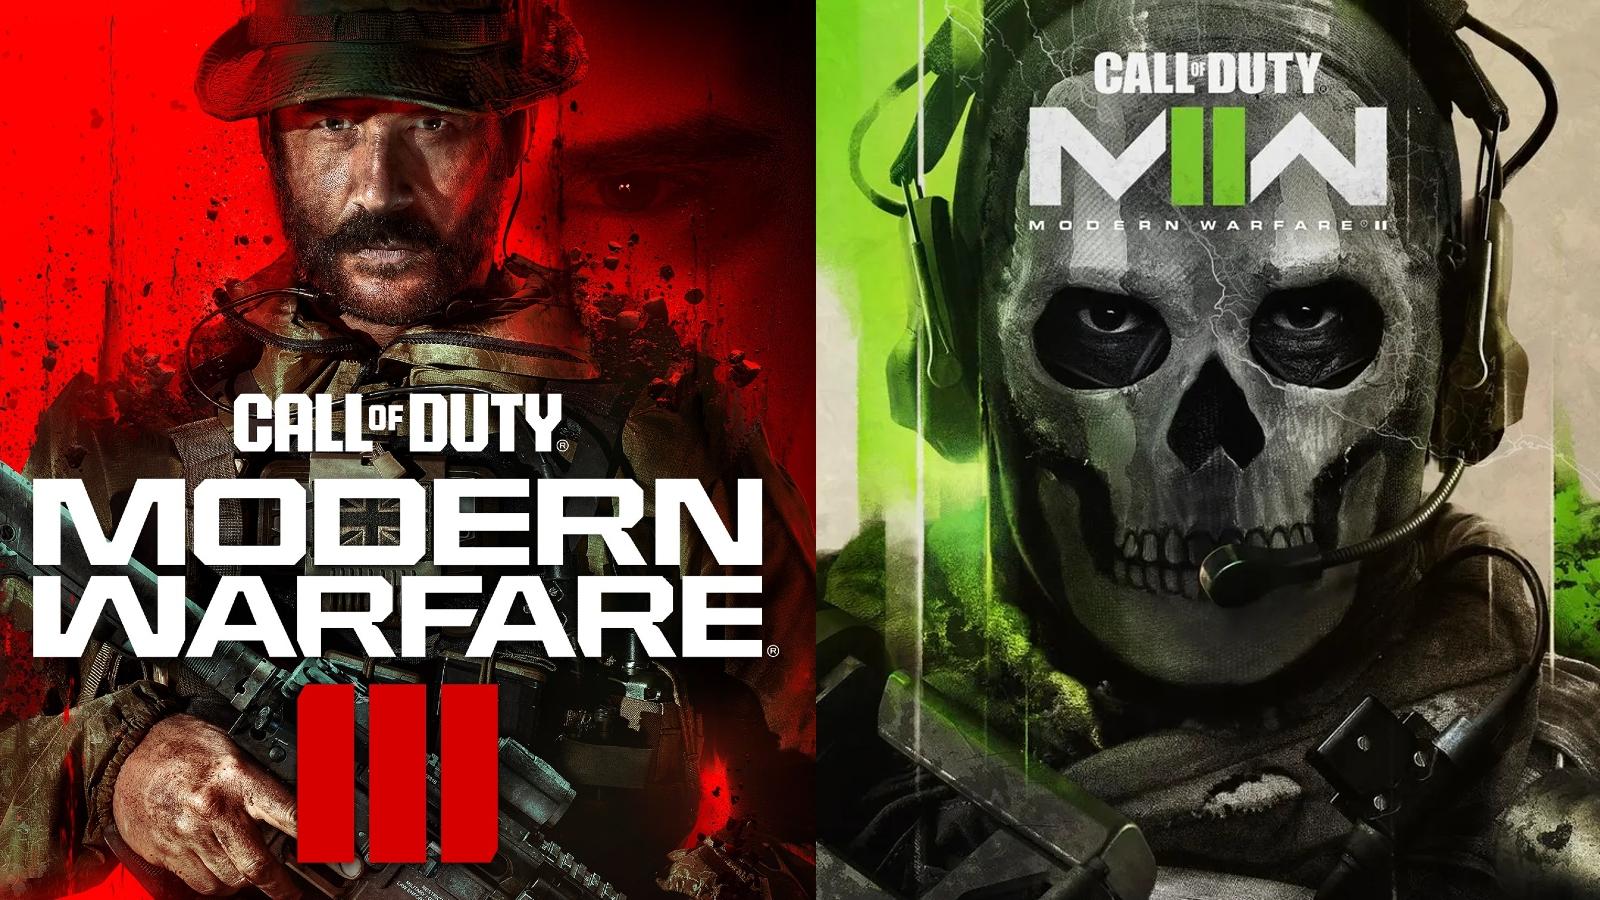 Players brand Modern Warfare 3 as one of the most polarizing Call